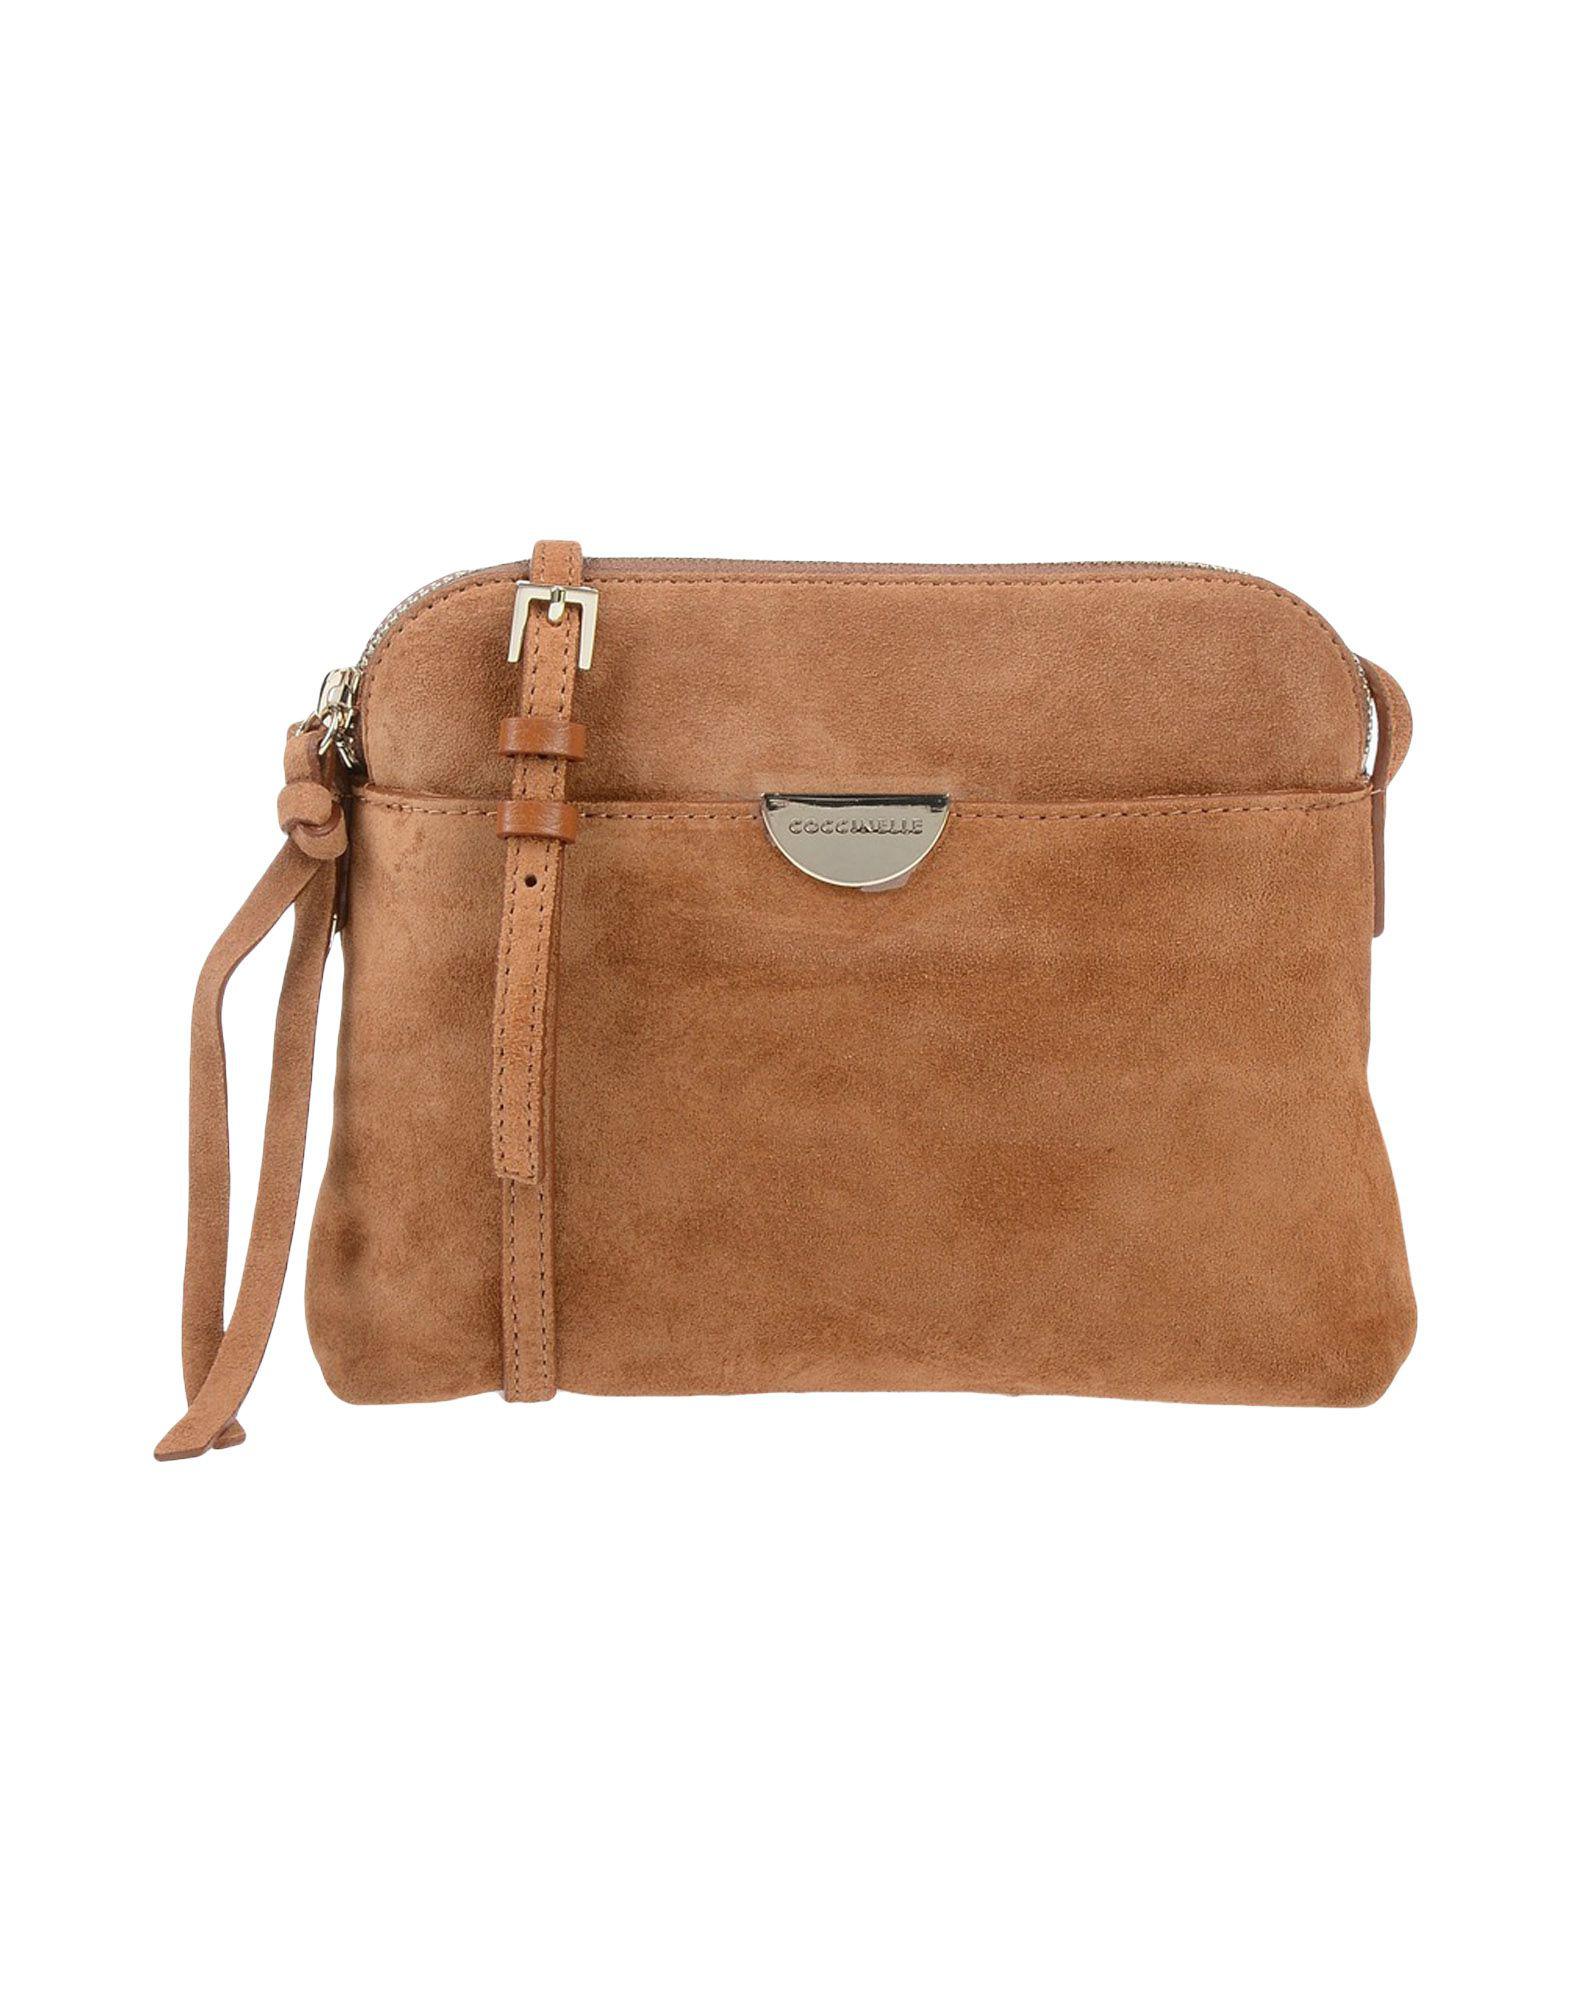 Coccinelle Suede Cross-body Bag in Brown - Lyst